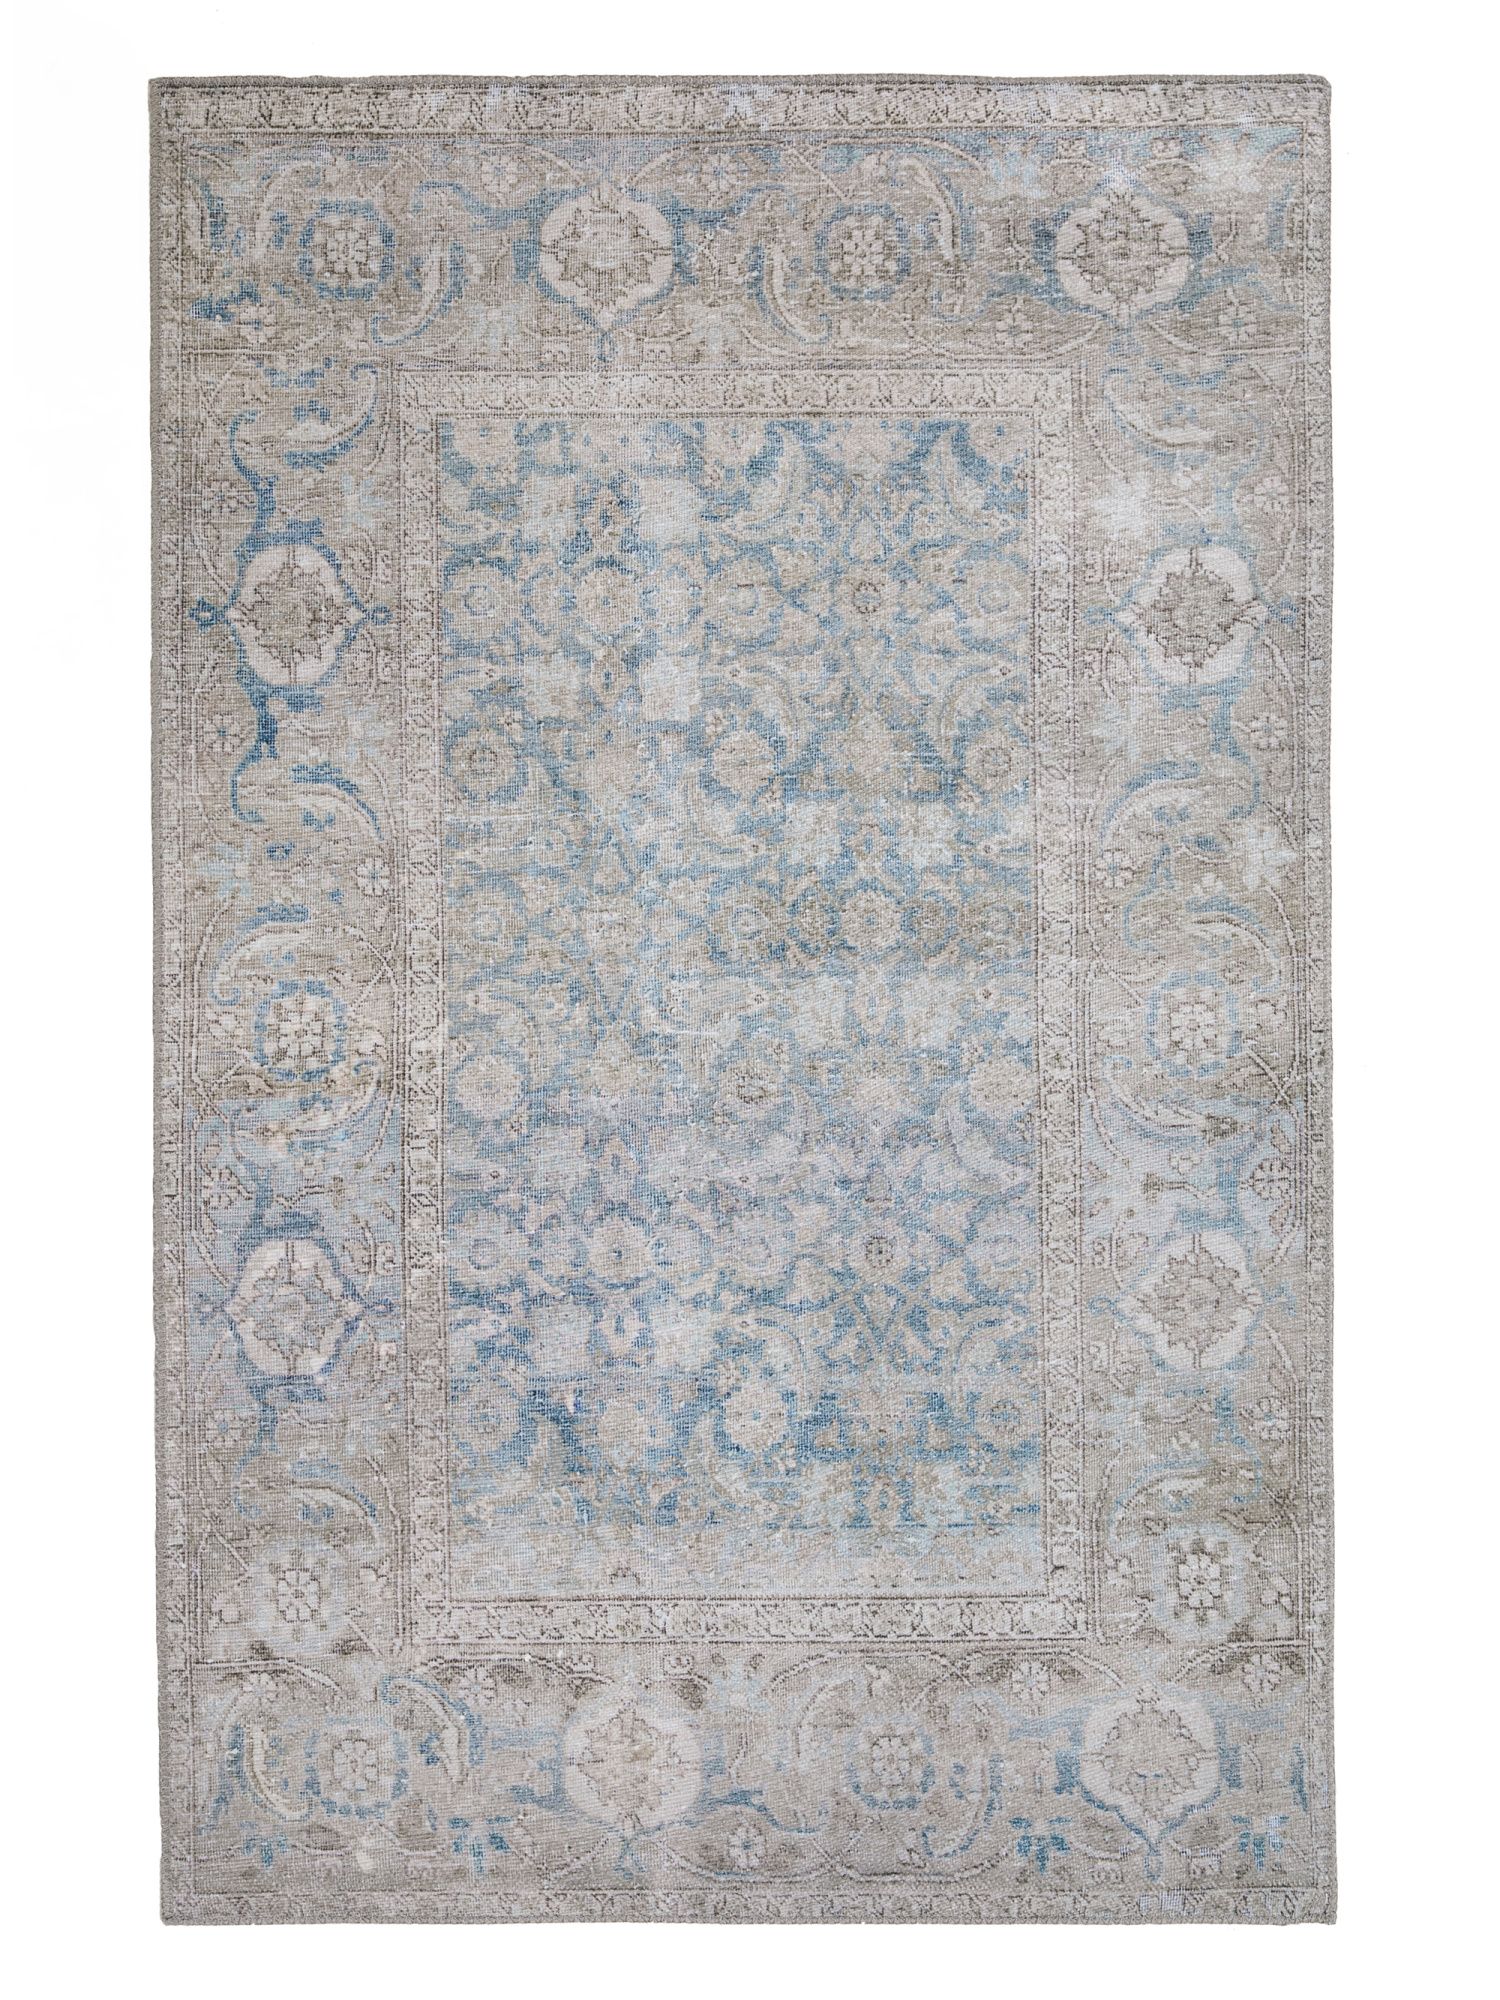 Made In Egypt Flat Weave Area Rug | The Global Decor Shop | Marshalls | Marshalls